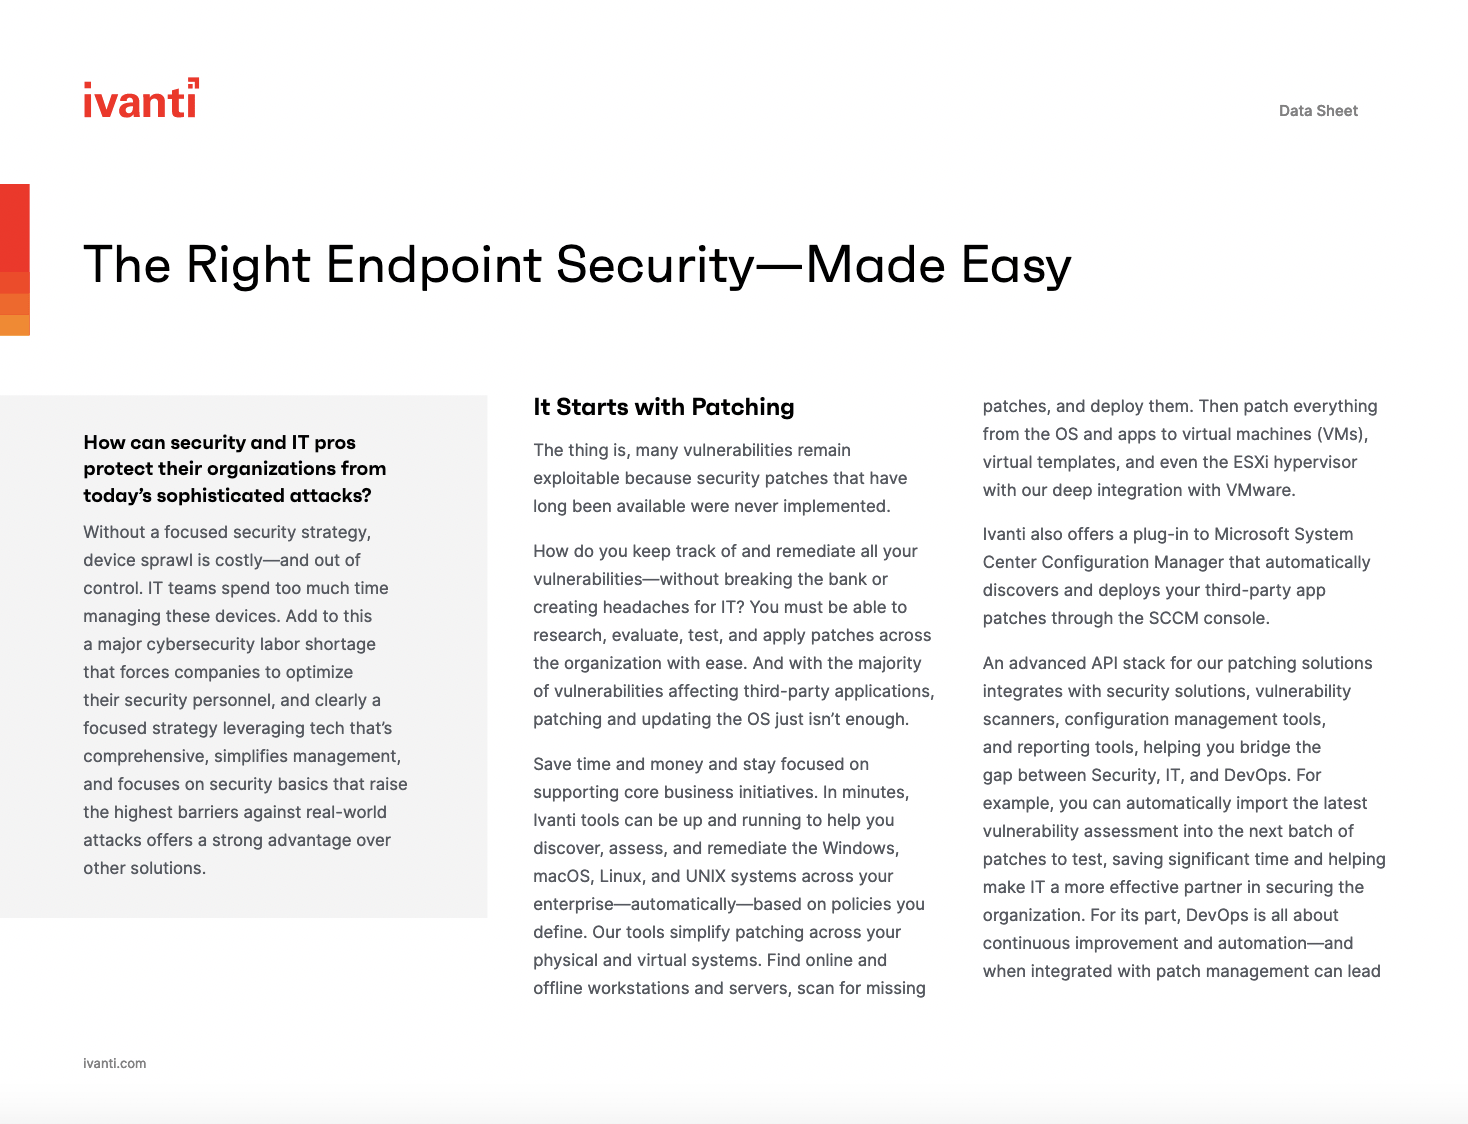 The Right Endpoint Security Made Easy - The Right Endpoint Security—Made Easy